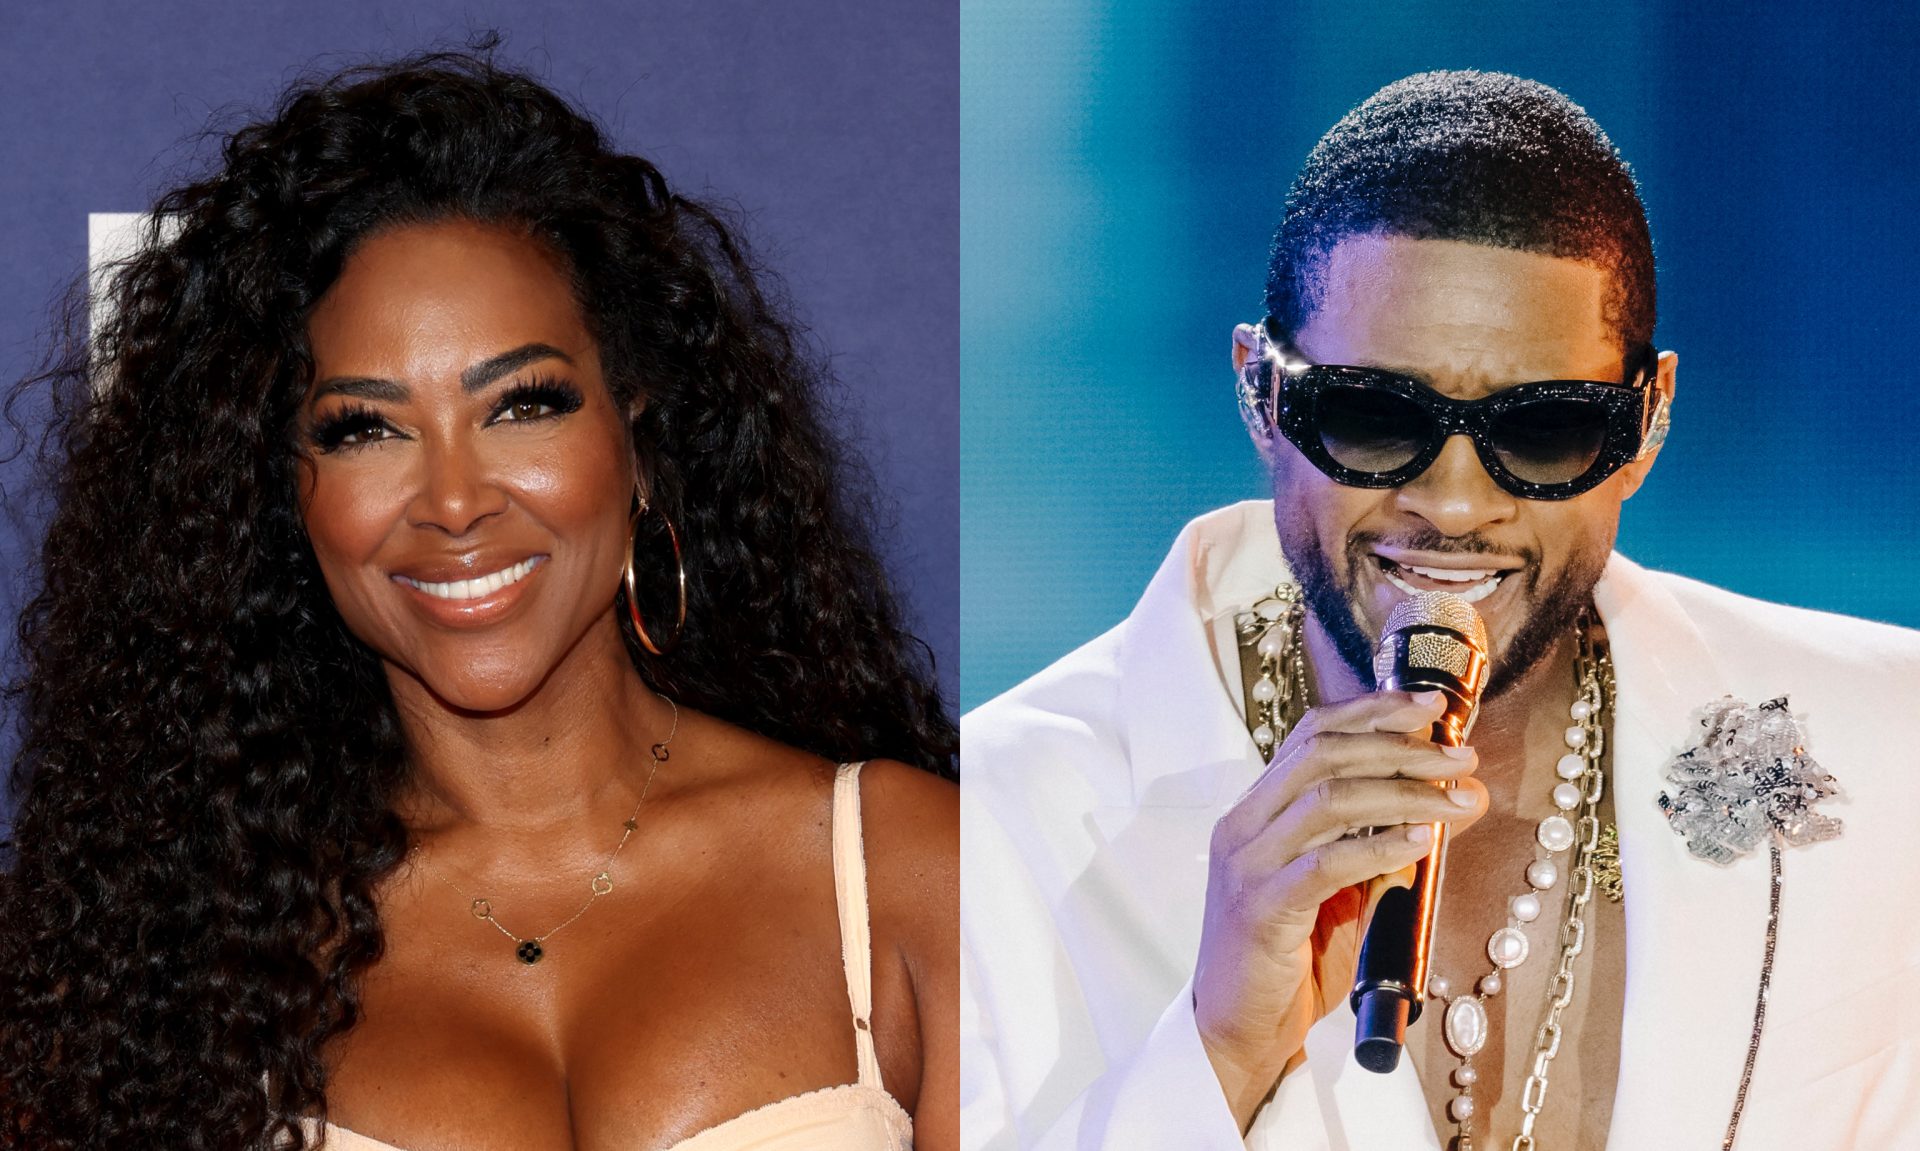 Kenya Moore Says Usher ‘Snatched’ Her ‘Soul’ During His Show